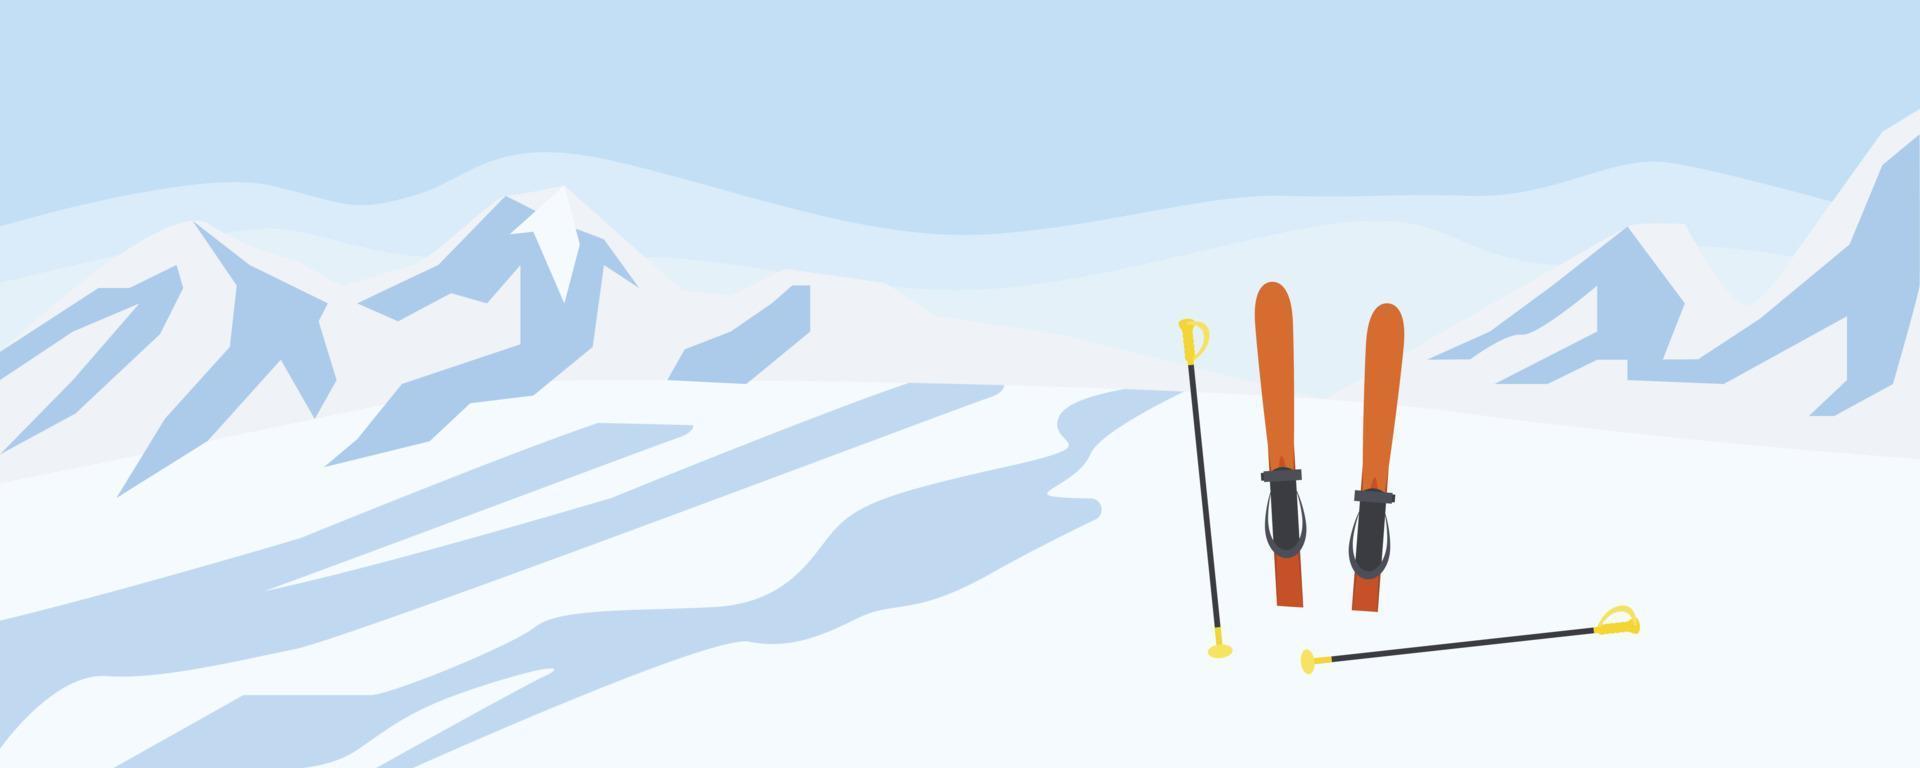 Ski on mountains snow concept background, flat style vector